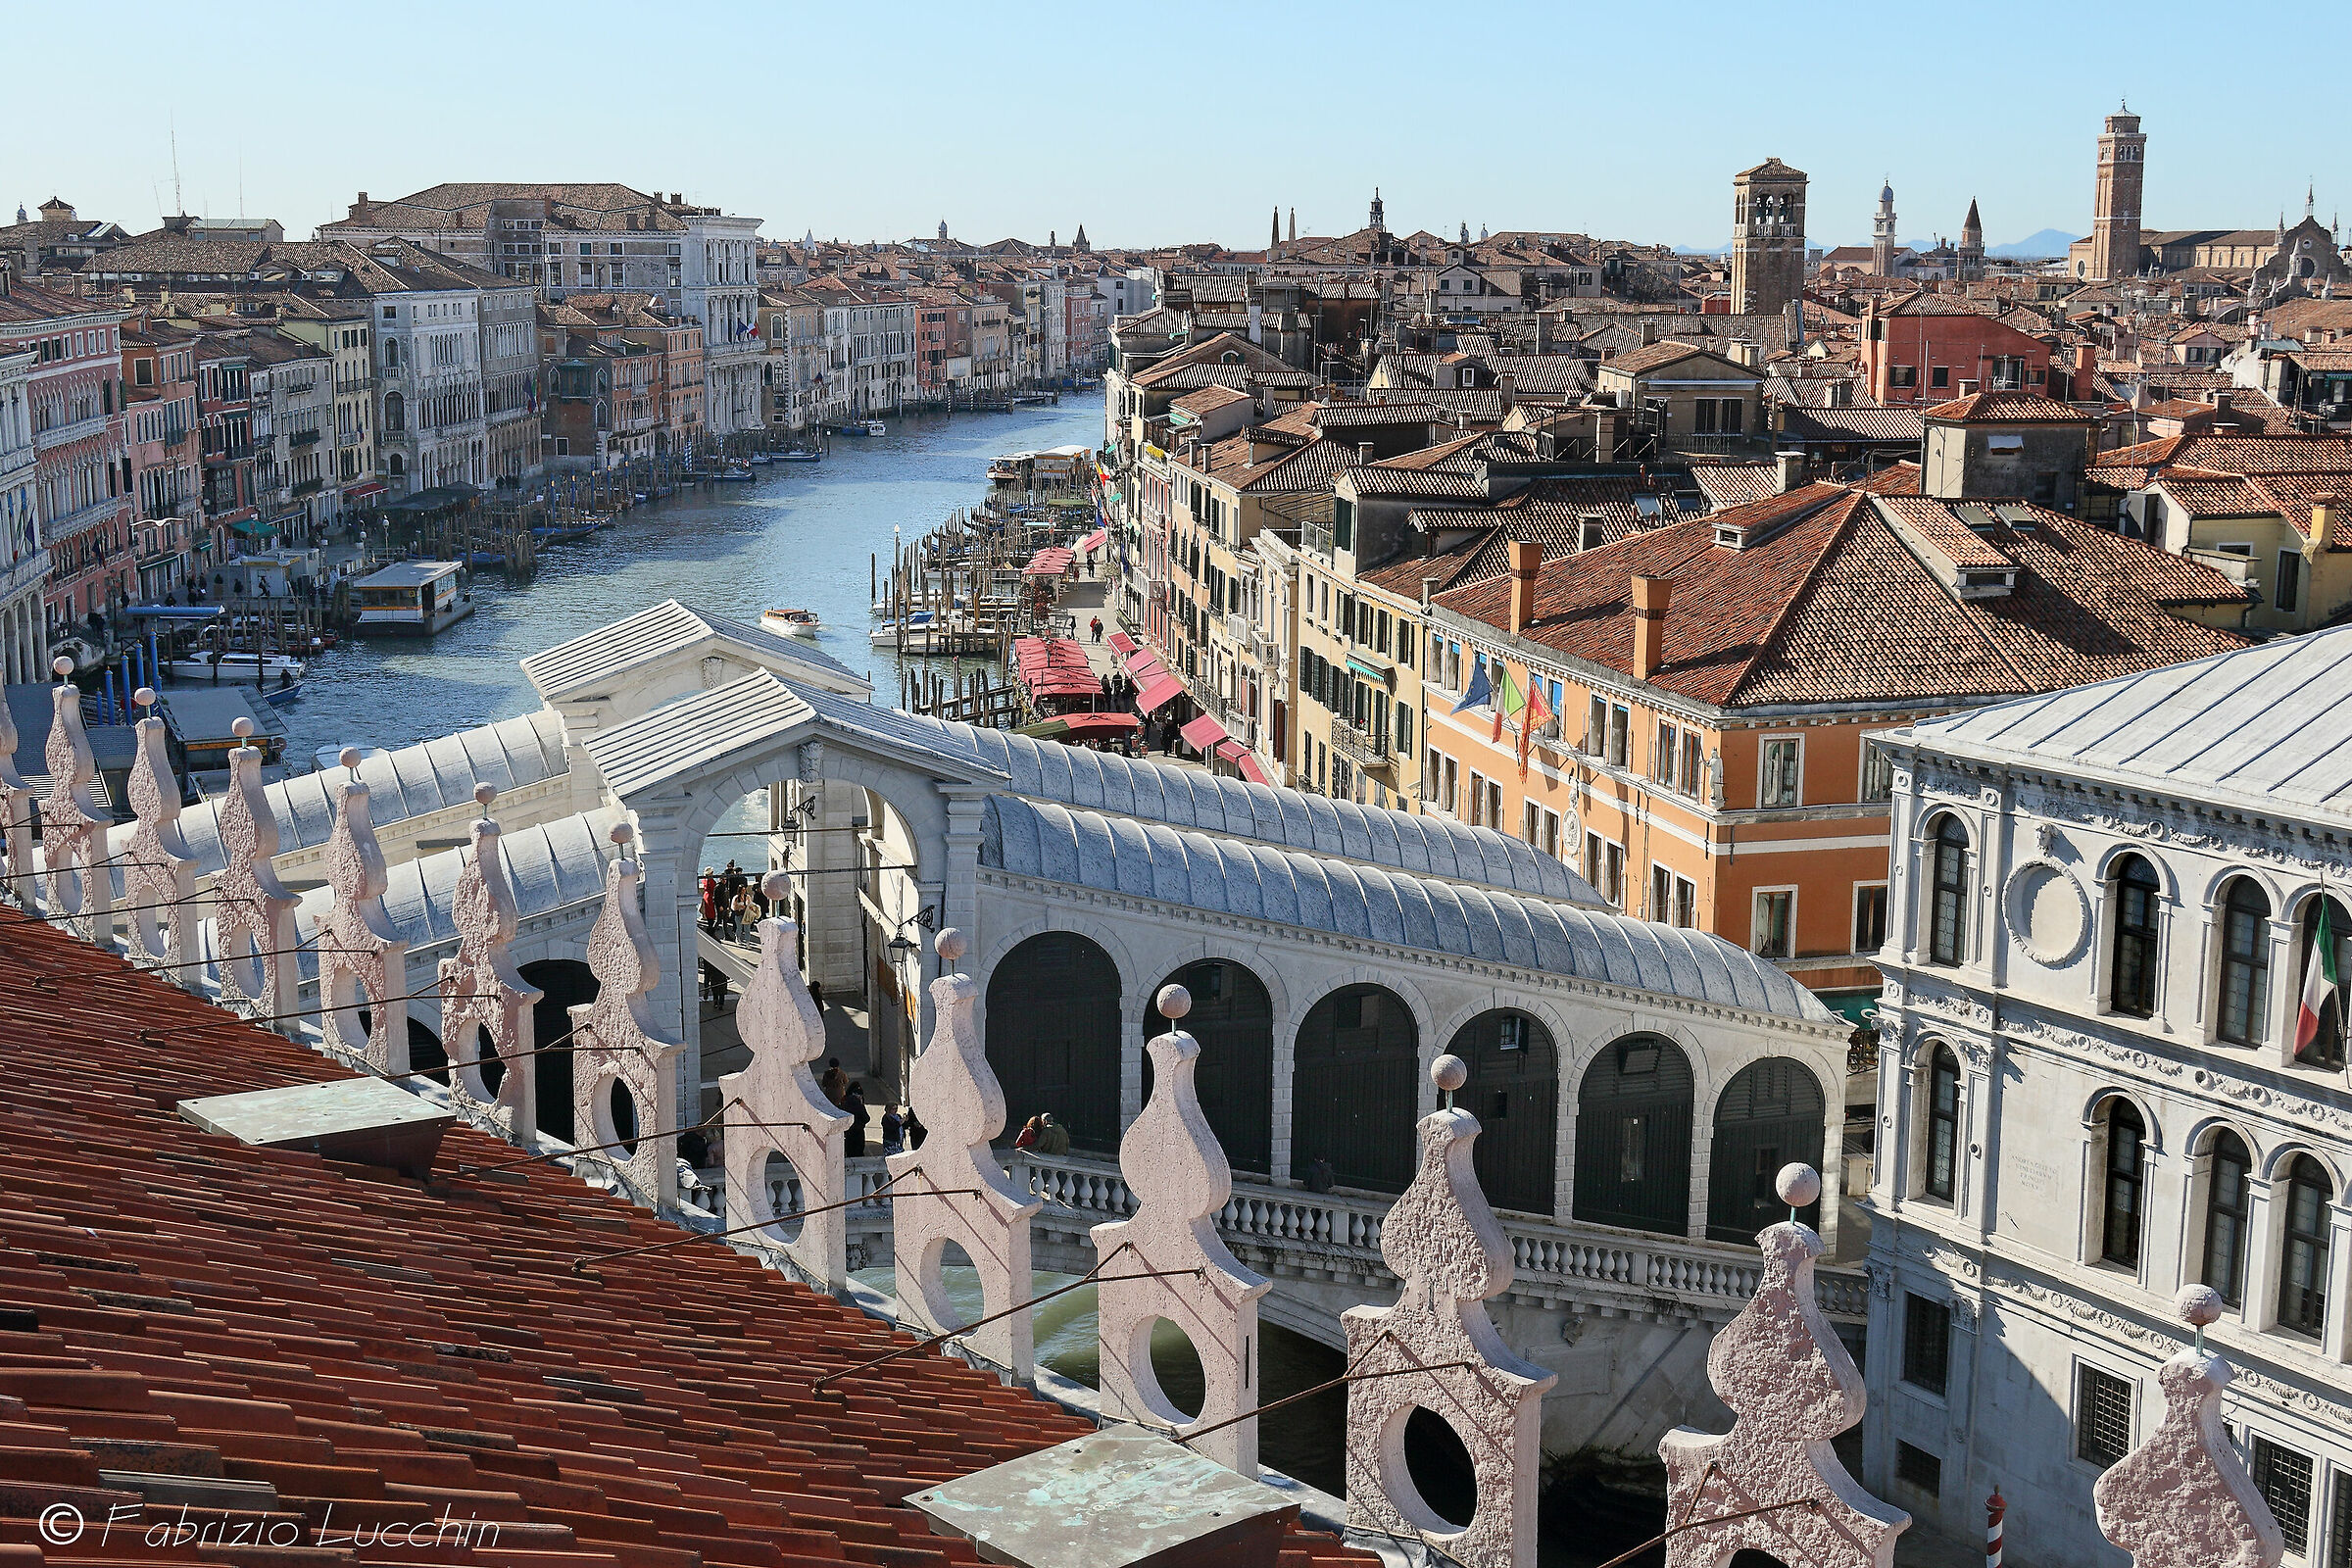 Venice as seen from: ...